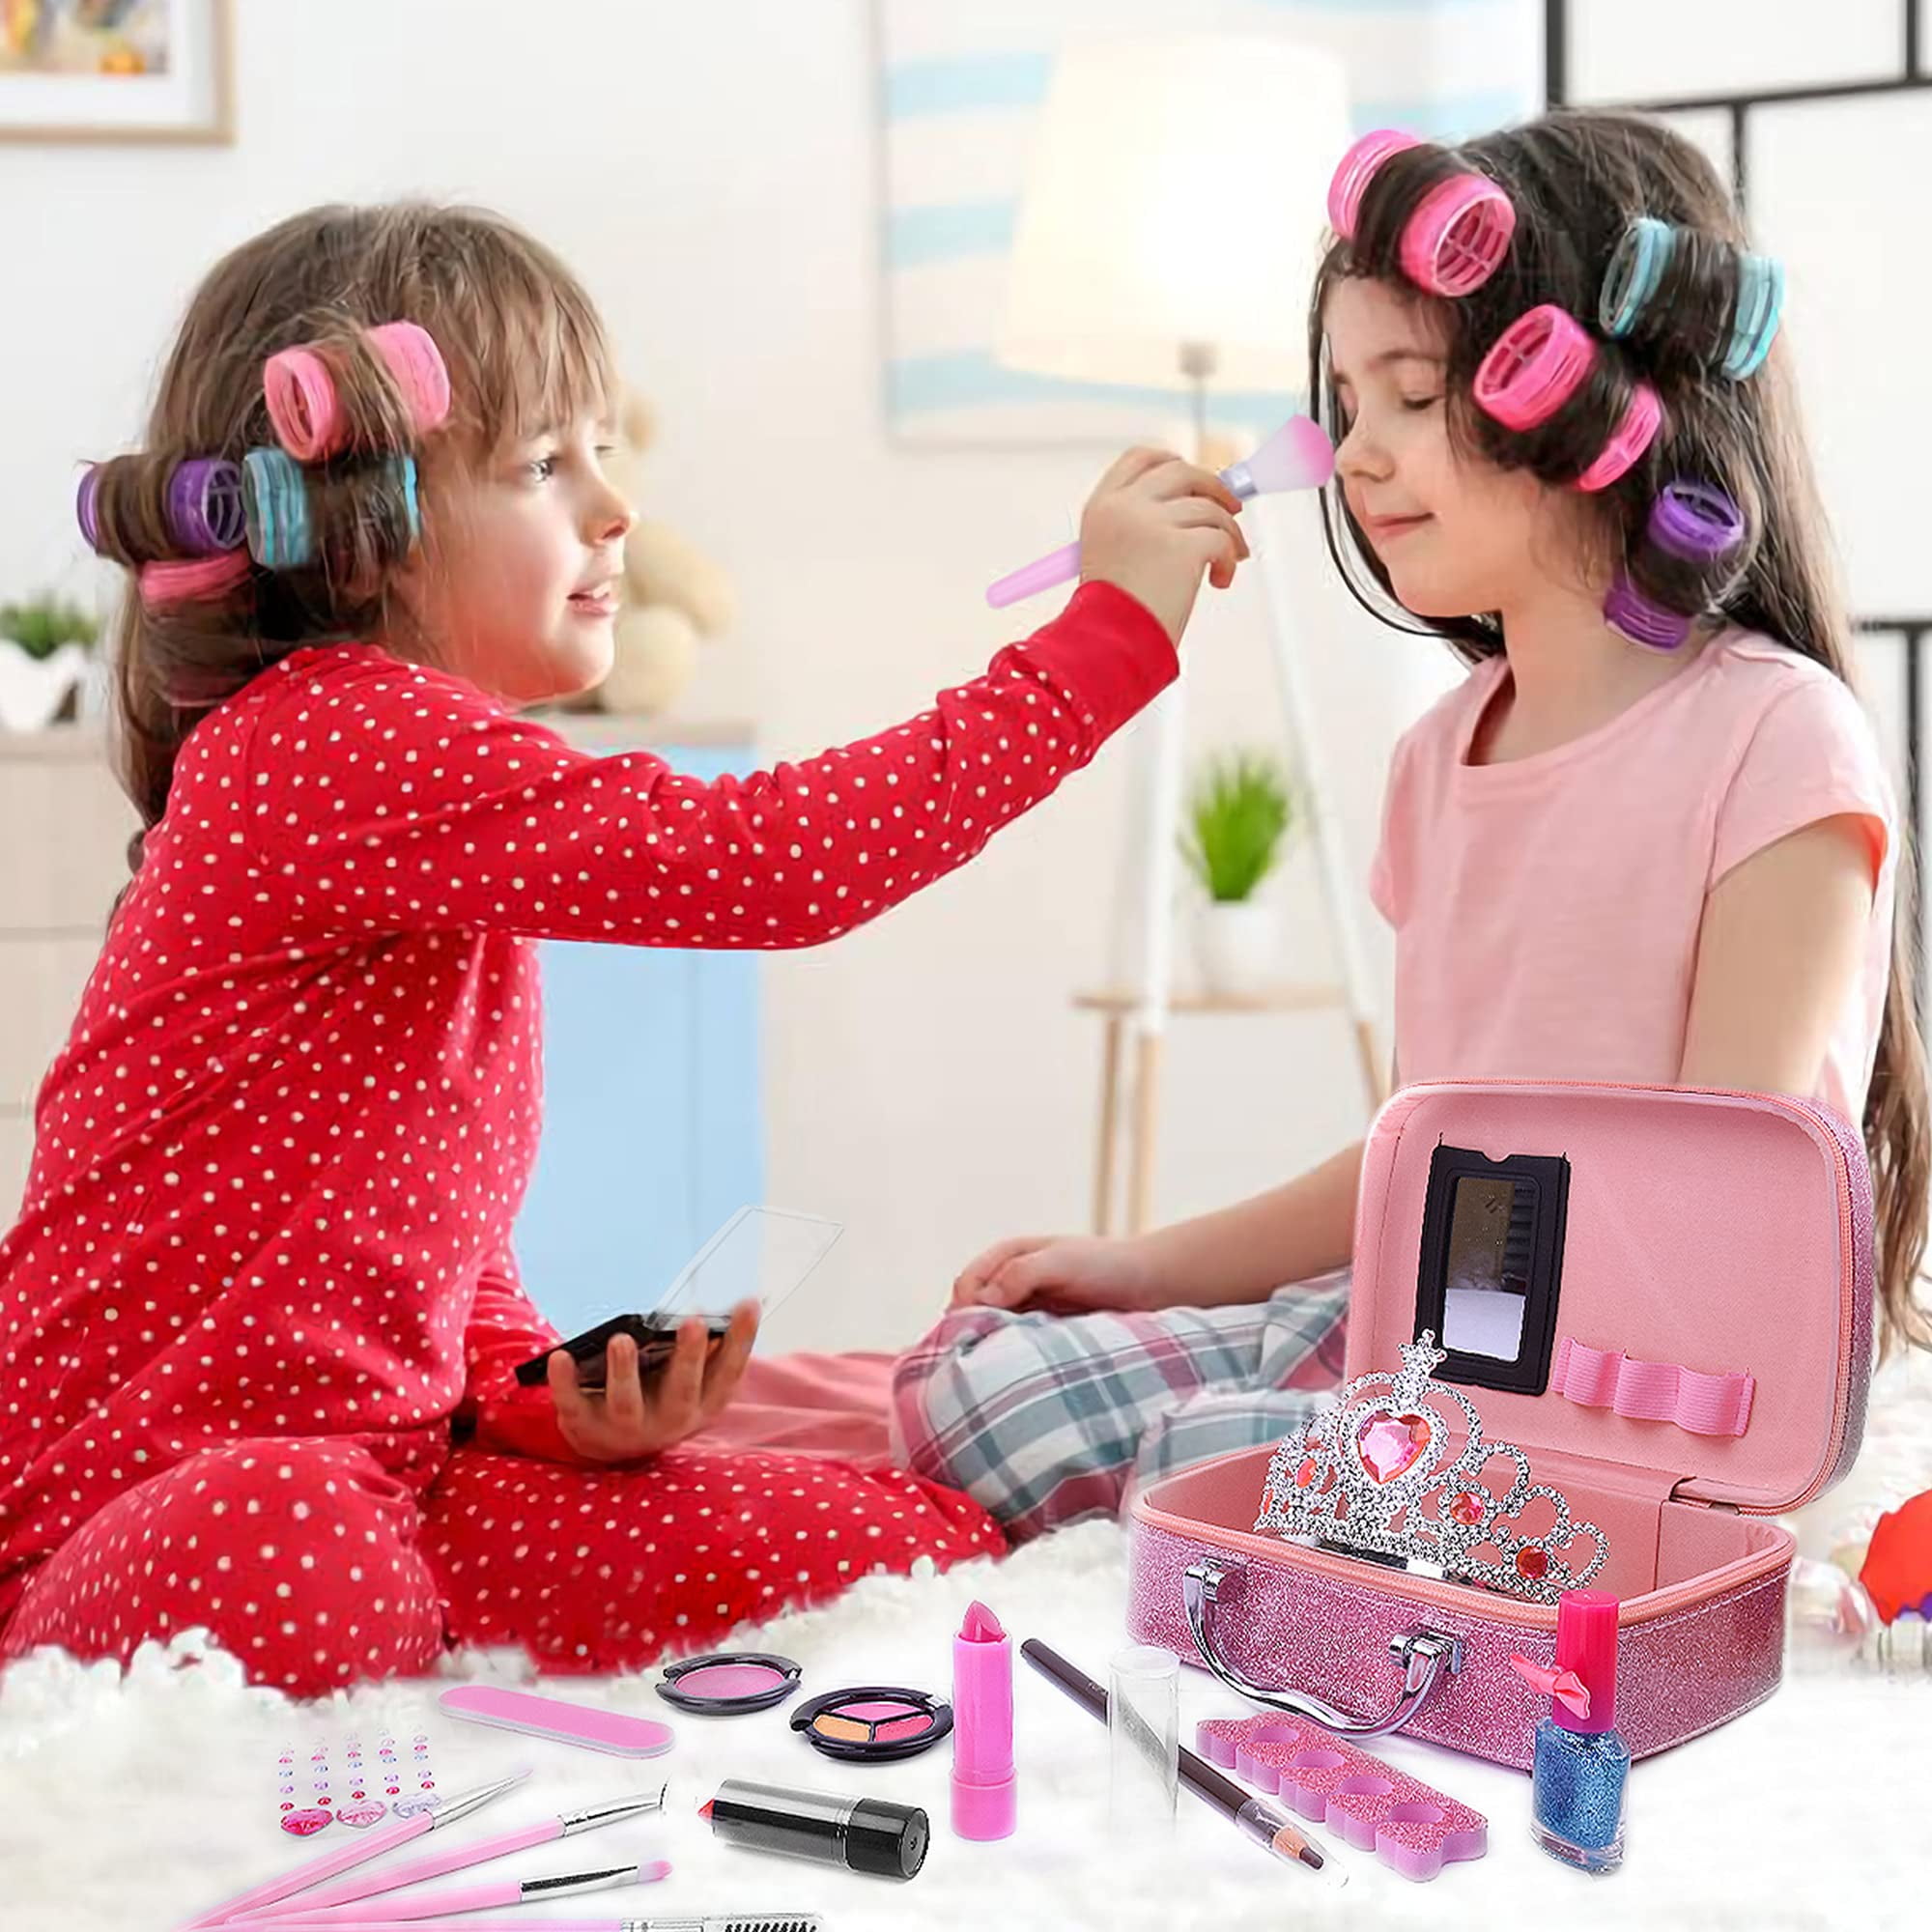 Mozok Kids Makeup Kit for Girls, Real Play Make Up Set Toys for 3 4 5 6 7 8 9 10 Years Old Girls, Washable Pretend Dress Up Beauty